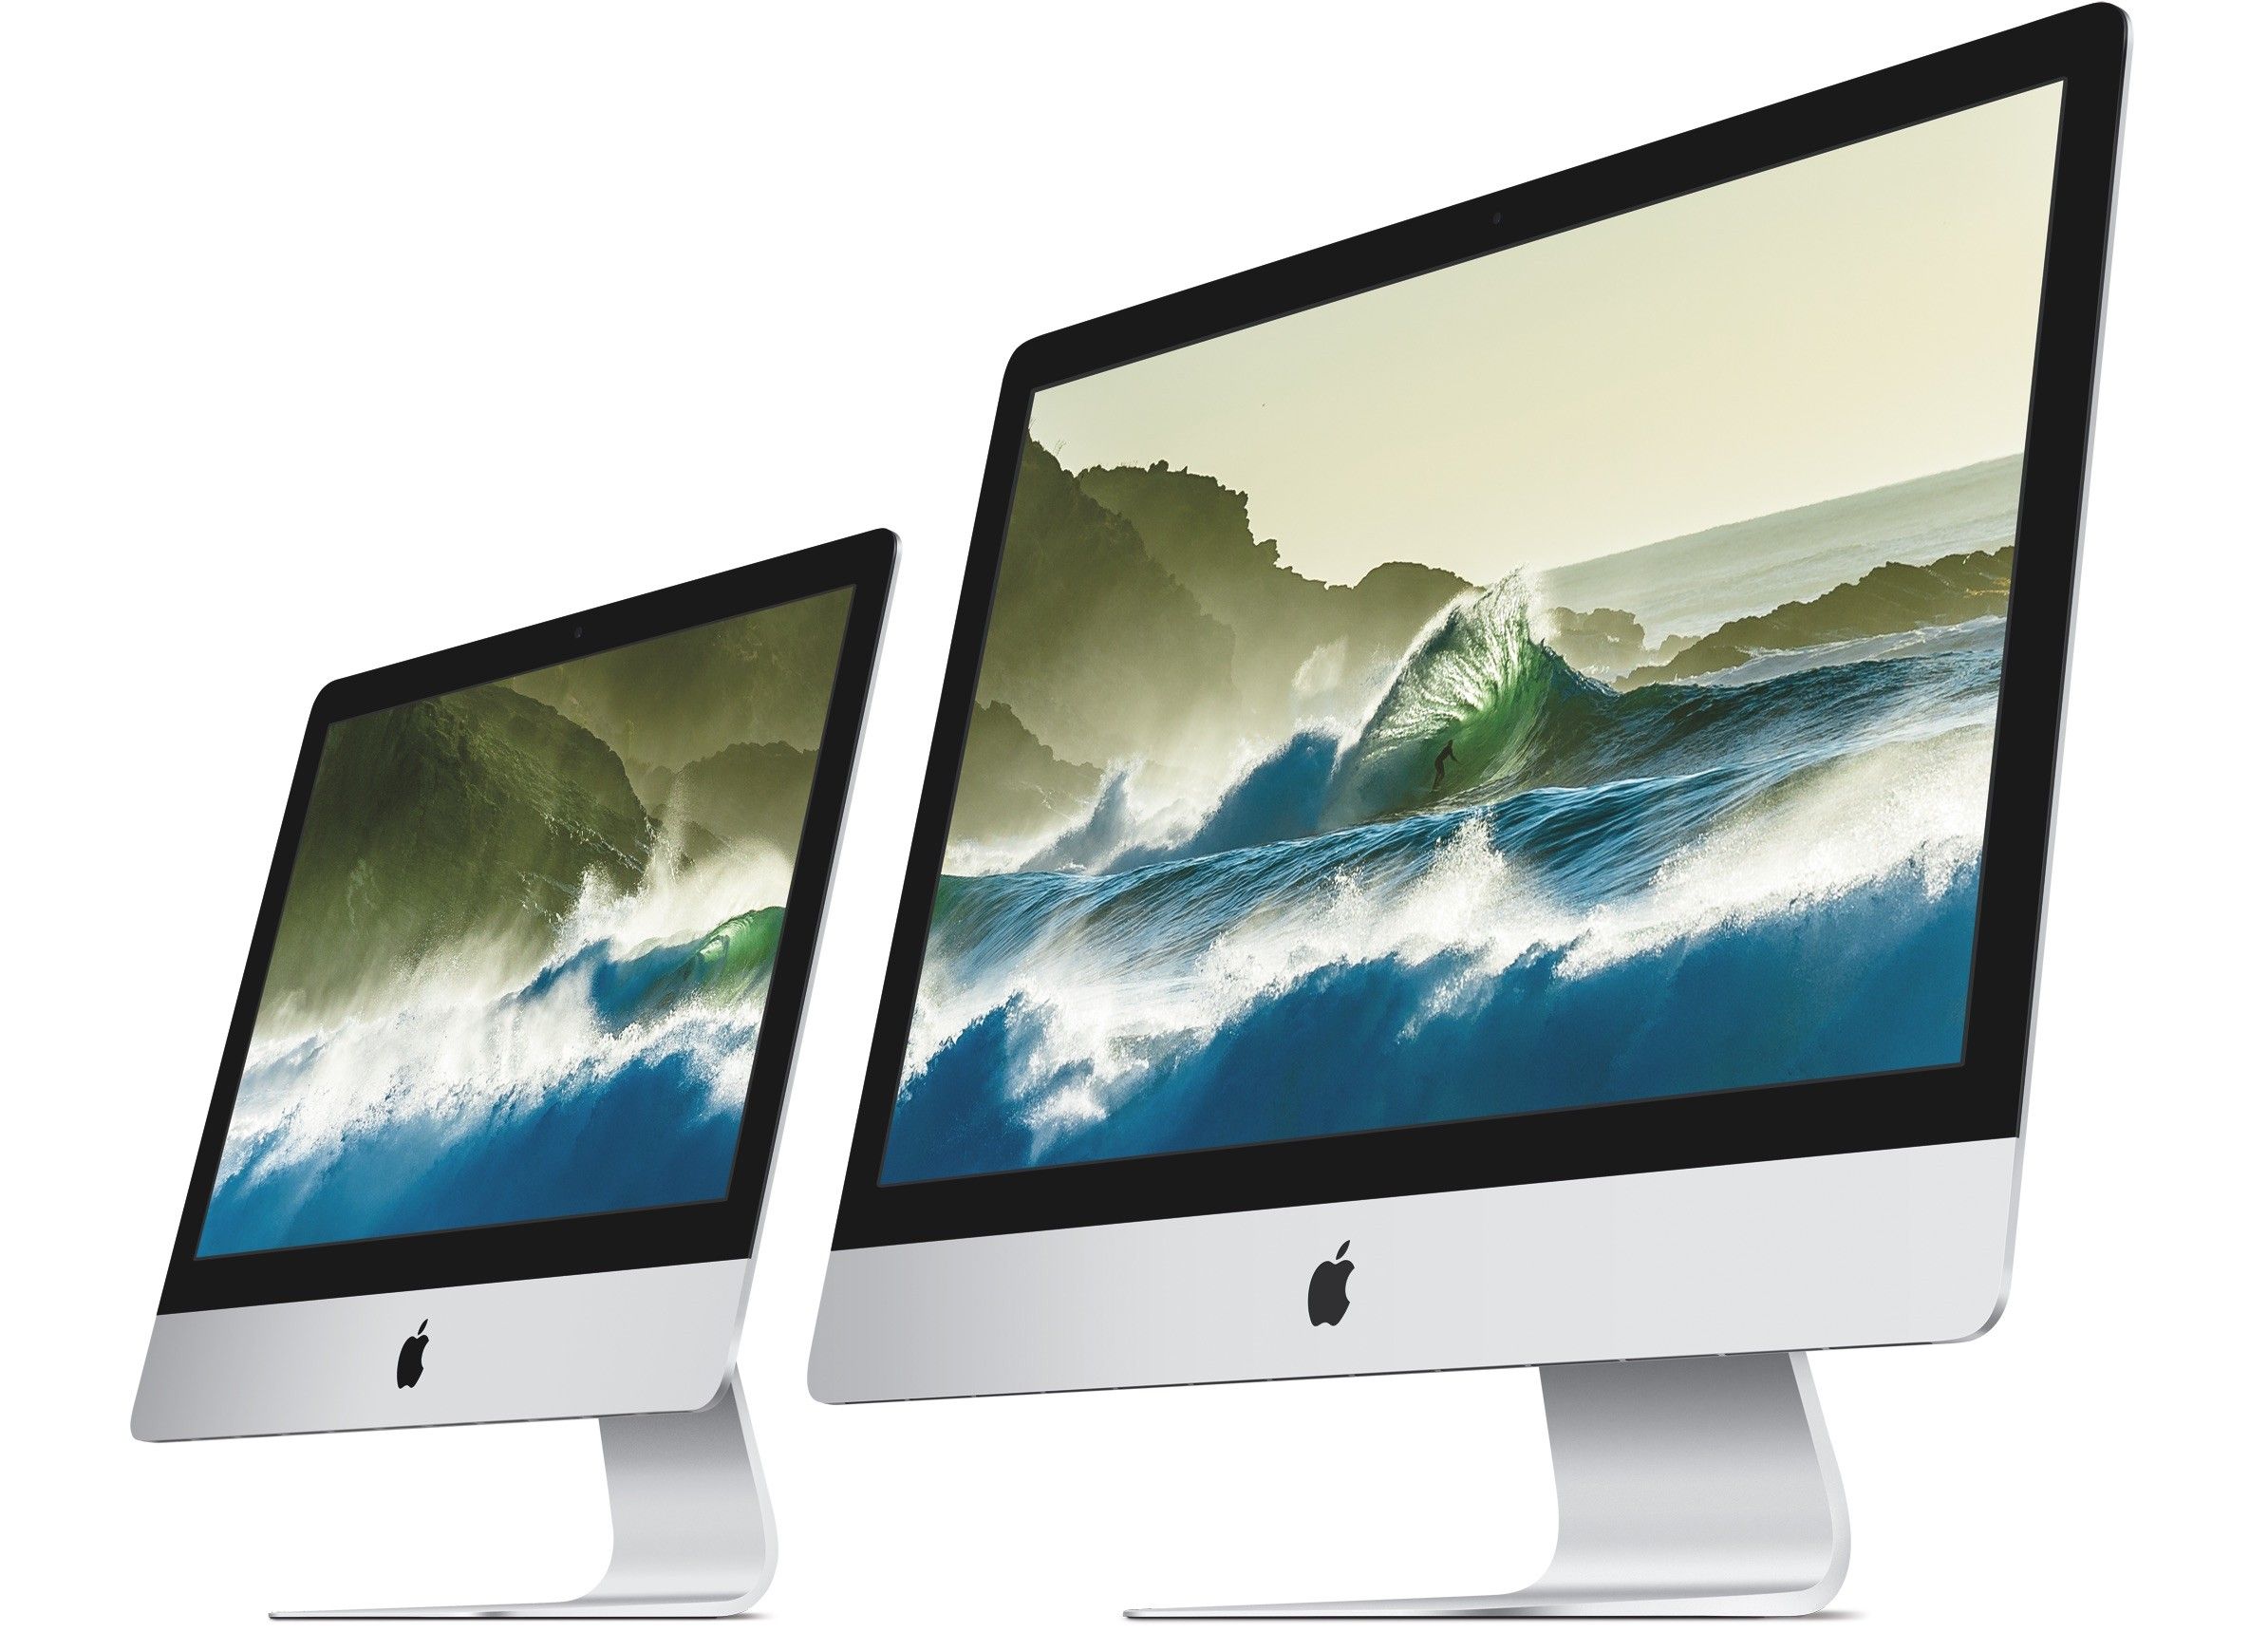 Apple Updates iMac Lineup with 4K & 5K Displays, Improves Color Technology